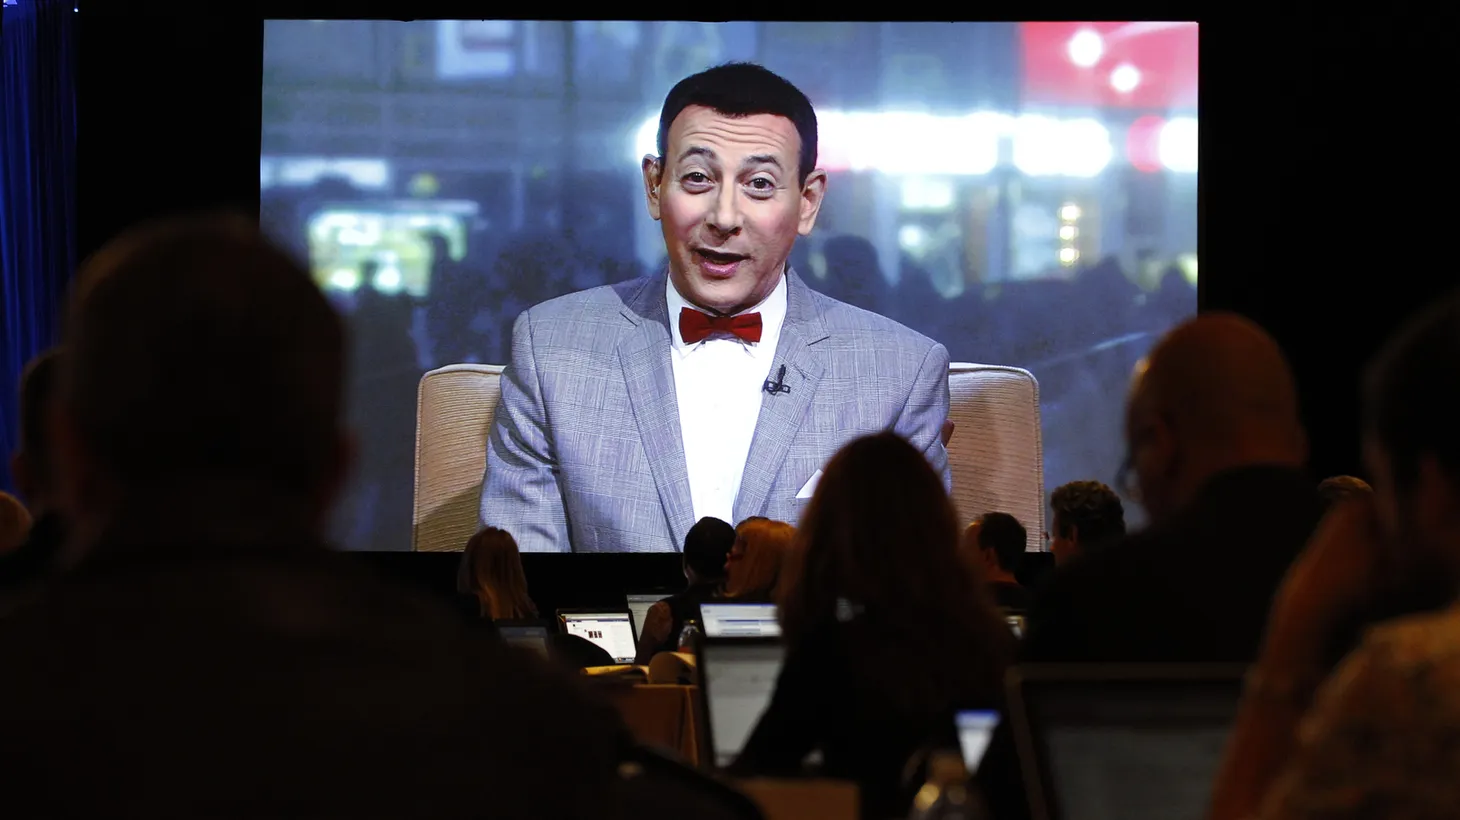 Paul Reubens, who hosted The Pee-wee Herman Radio Hour on KCRW in 2021, defined a generation with his humor, creativity, style, and, of course, music taste.